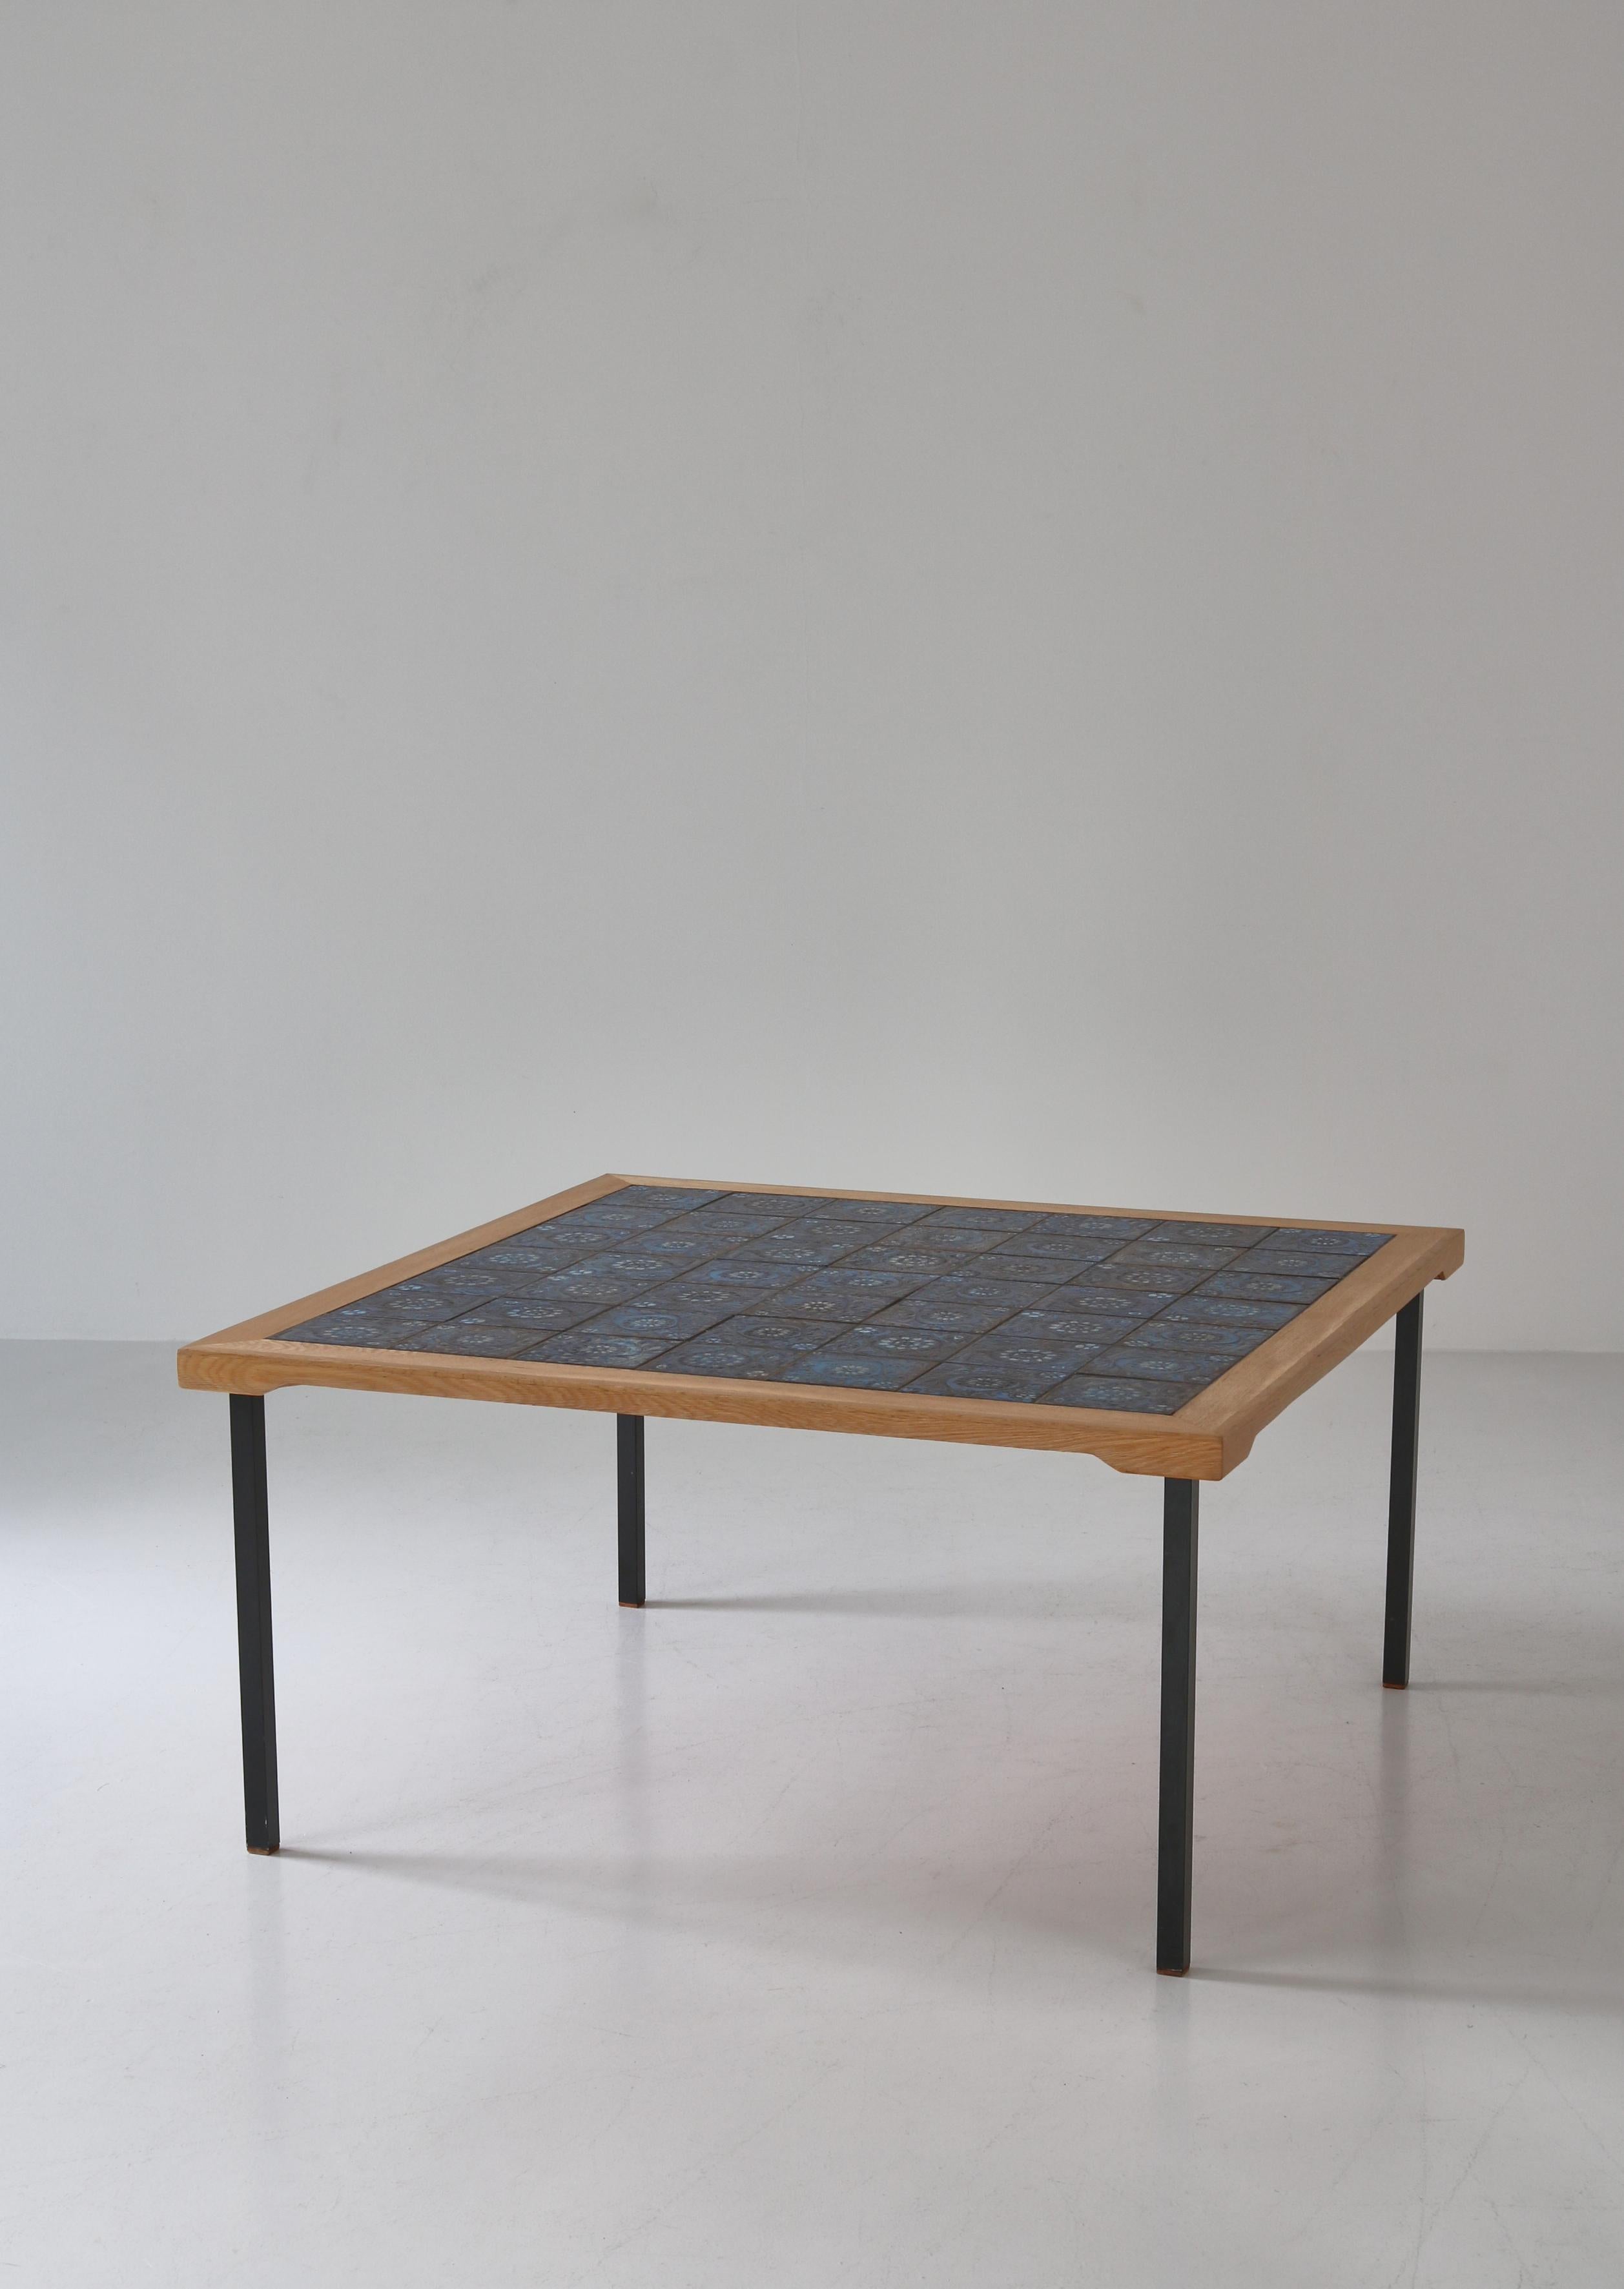 Scandianvian Modern Square Table in Oak Wood with Blue Ceramic Tiles, 1960s 4